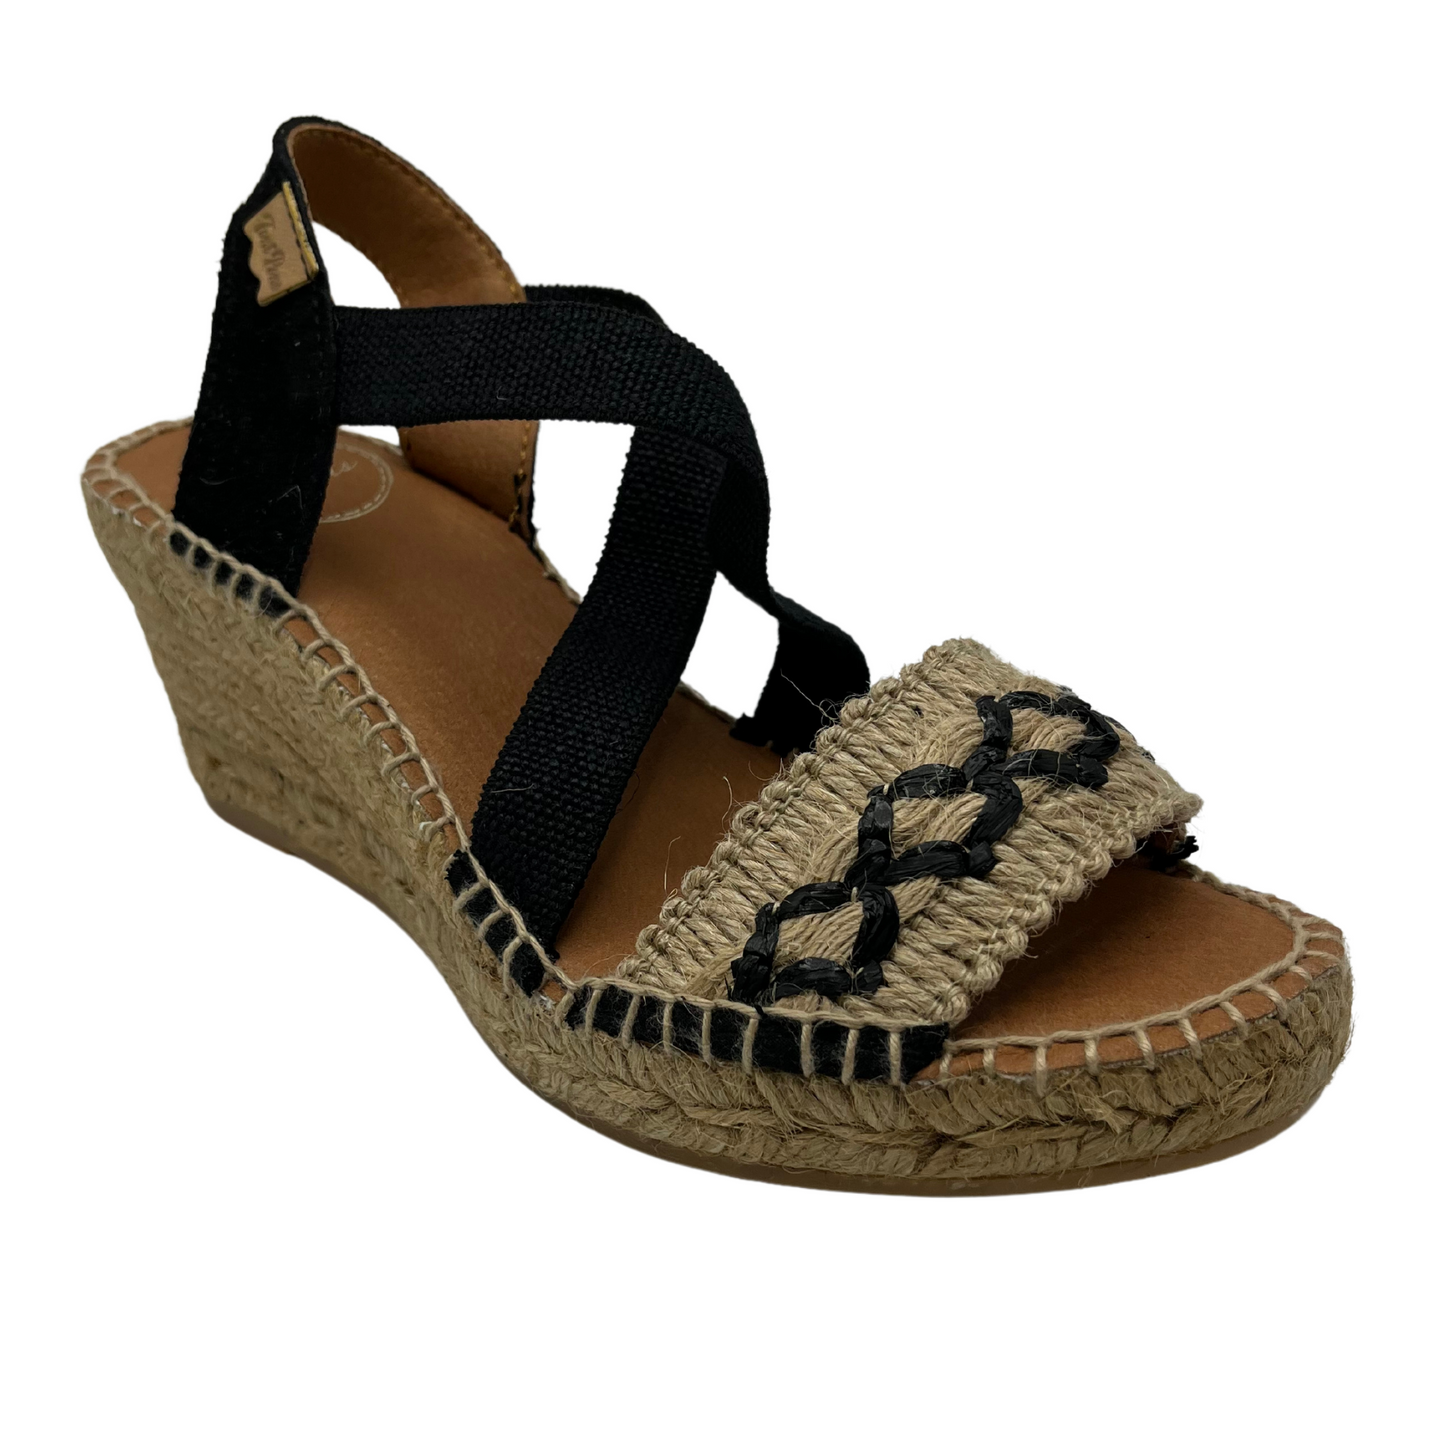 45 degree angled view of black and beige wedge sandal with X pattern across toe